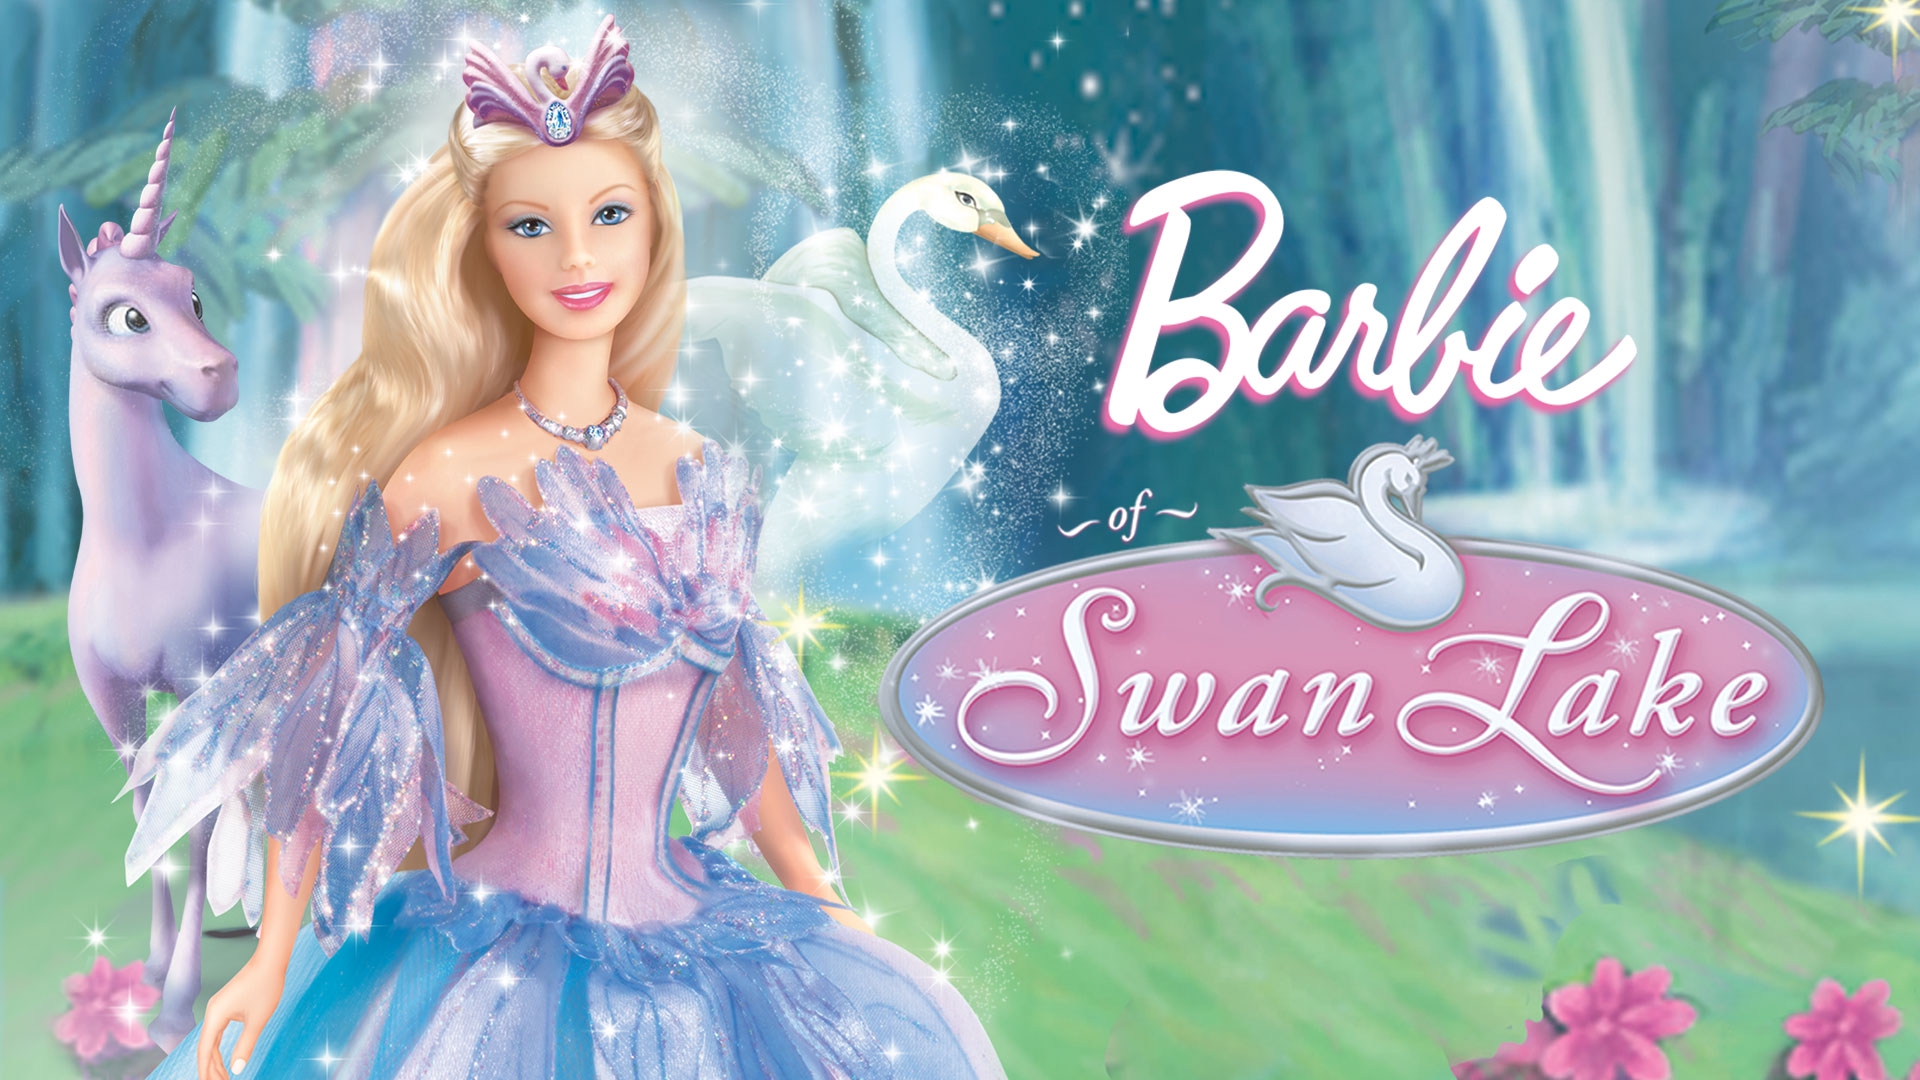 Stream Barbie Of Swan Lake Online. Download and Watch HD Movies